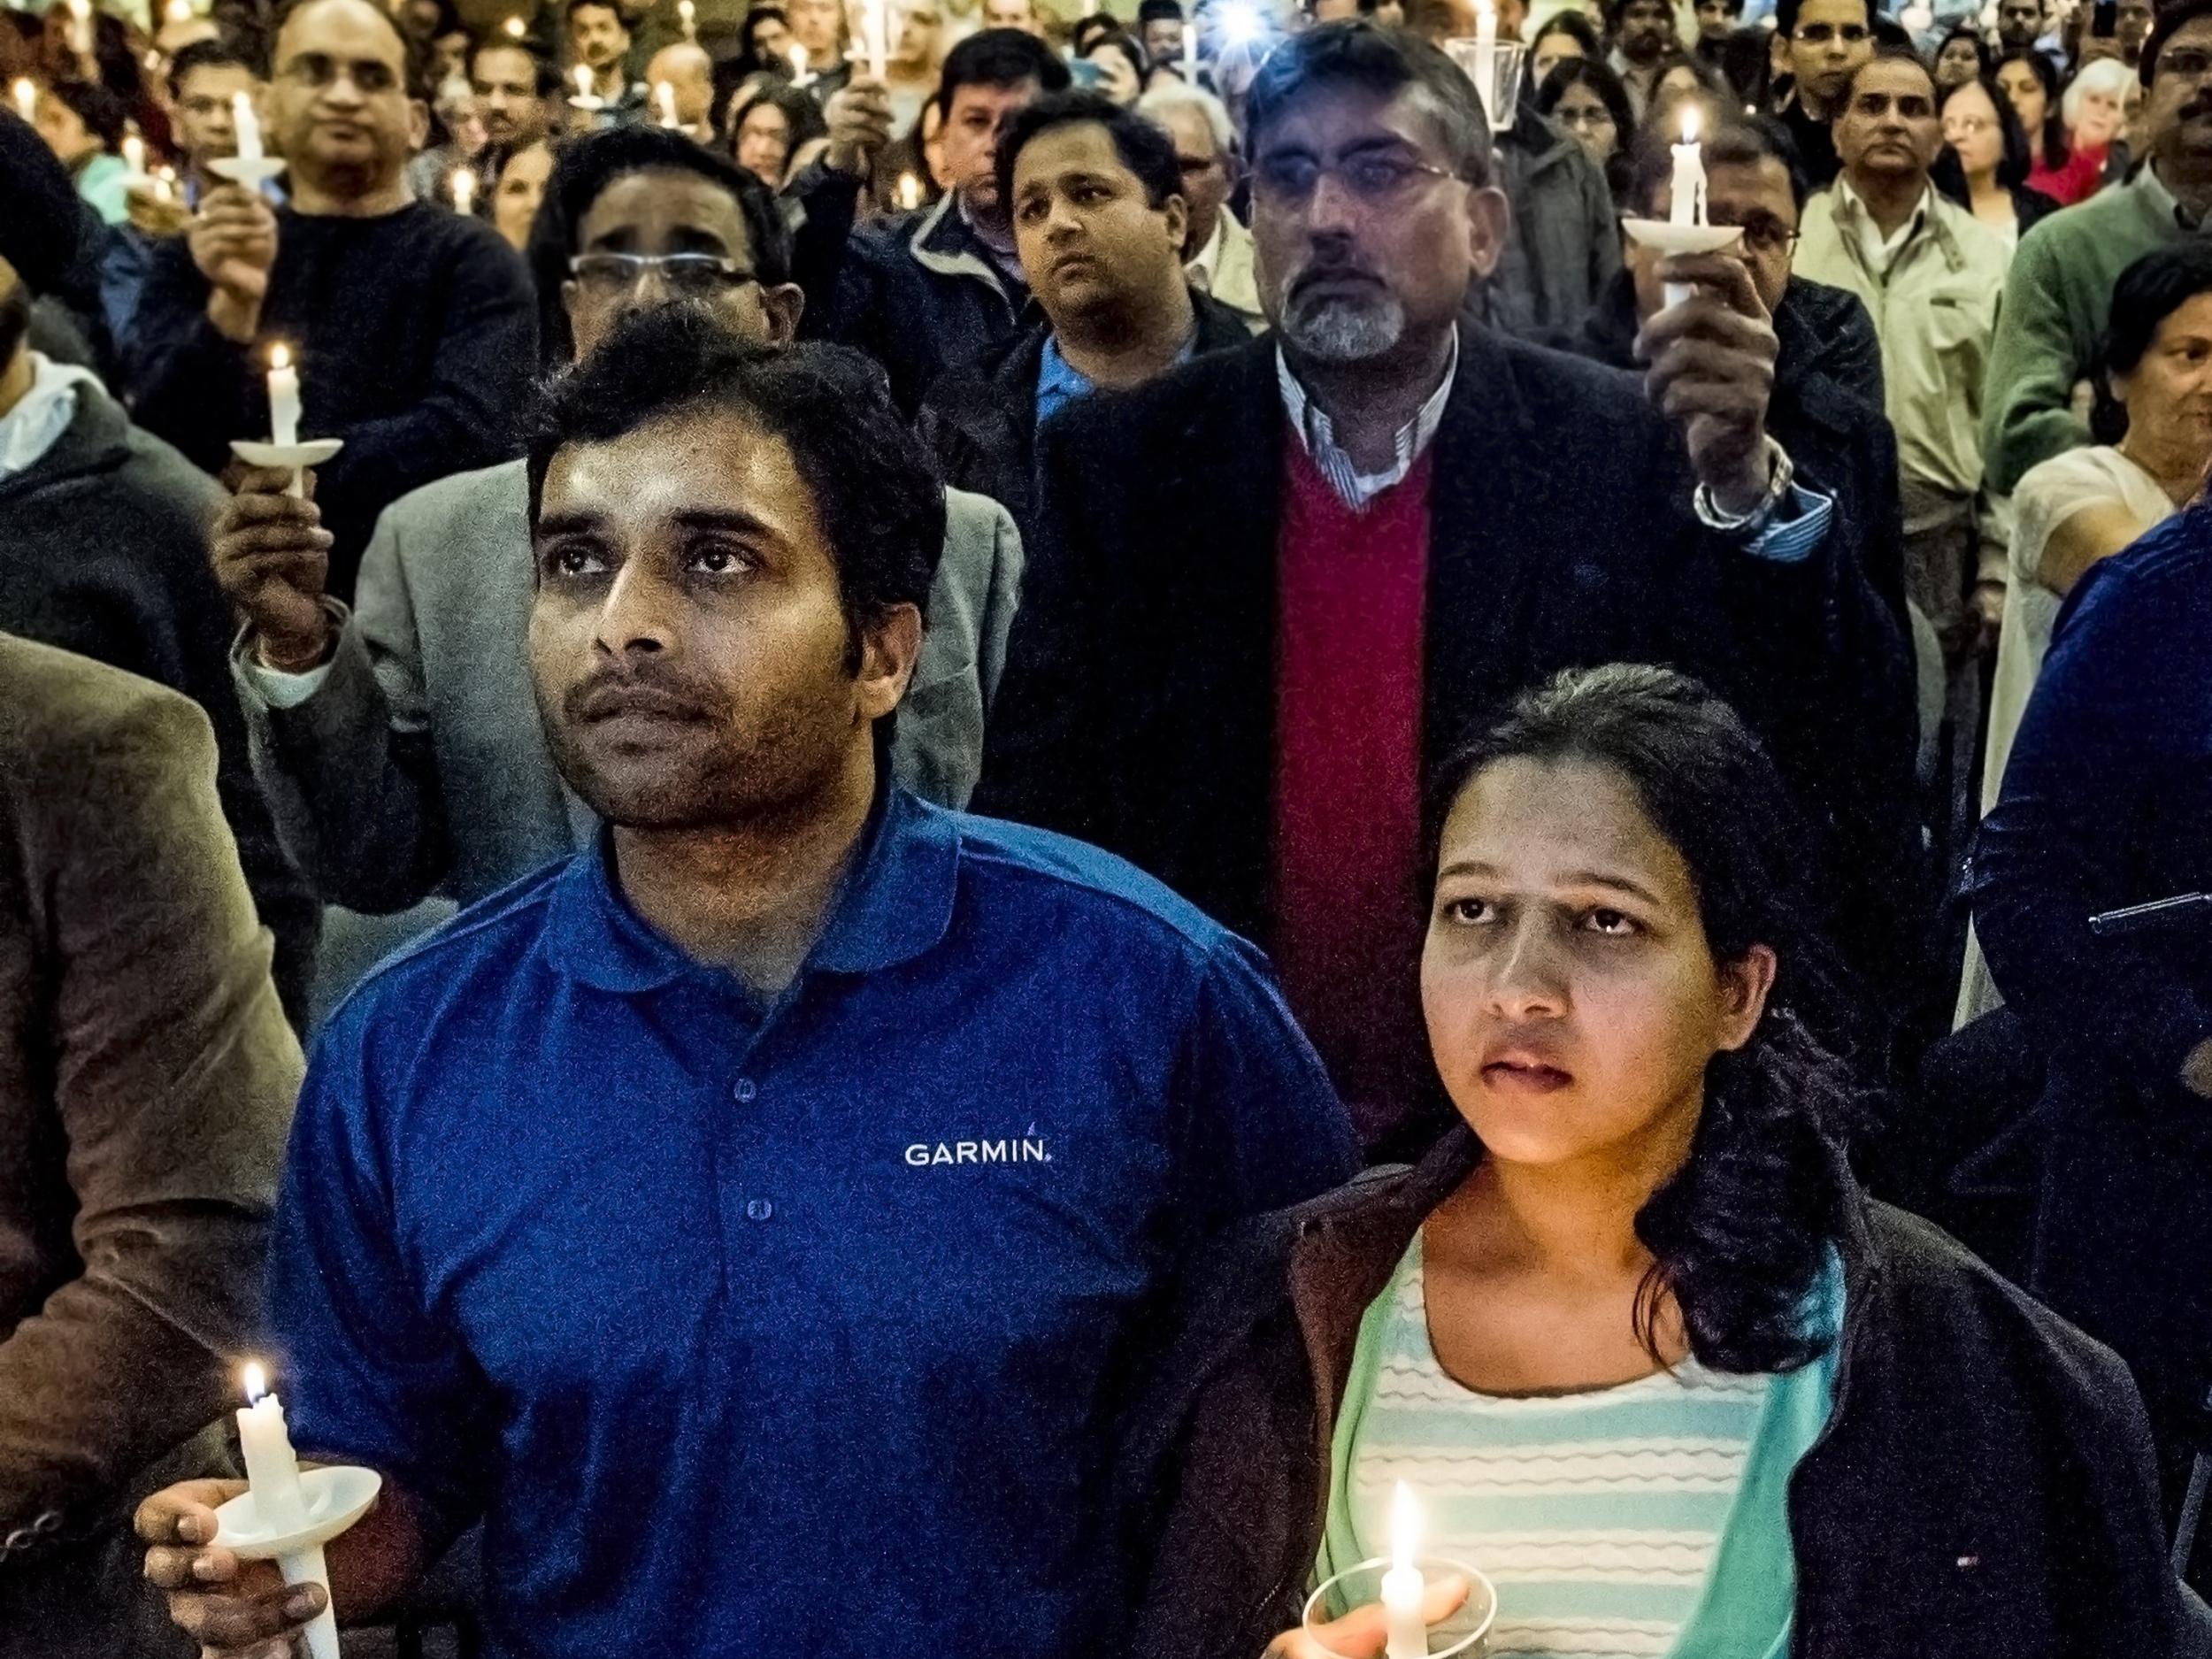 Alok Madasani, left, and his wife Reepthi Gangula hold candles during a vigil on Sunday February 26th at the Ball Conference Center in Olathe, Kansas, held in response to the deadly shooting